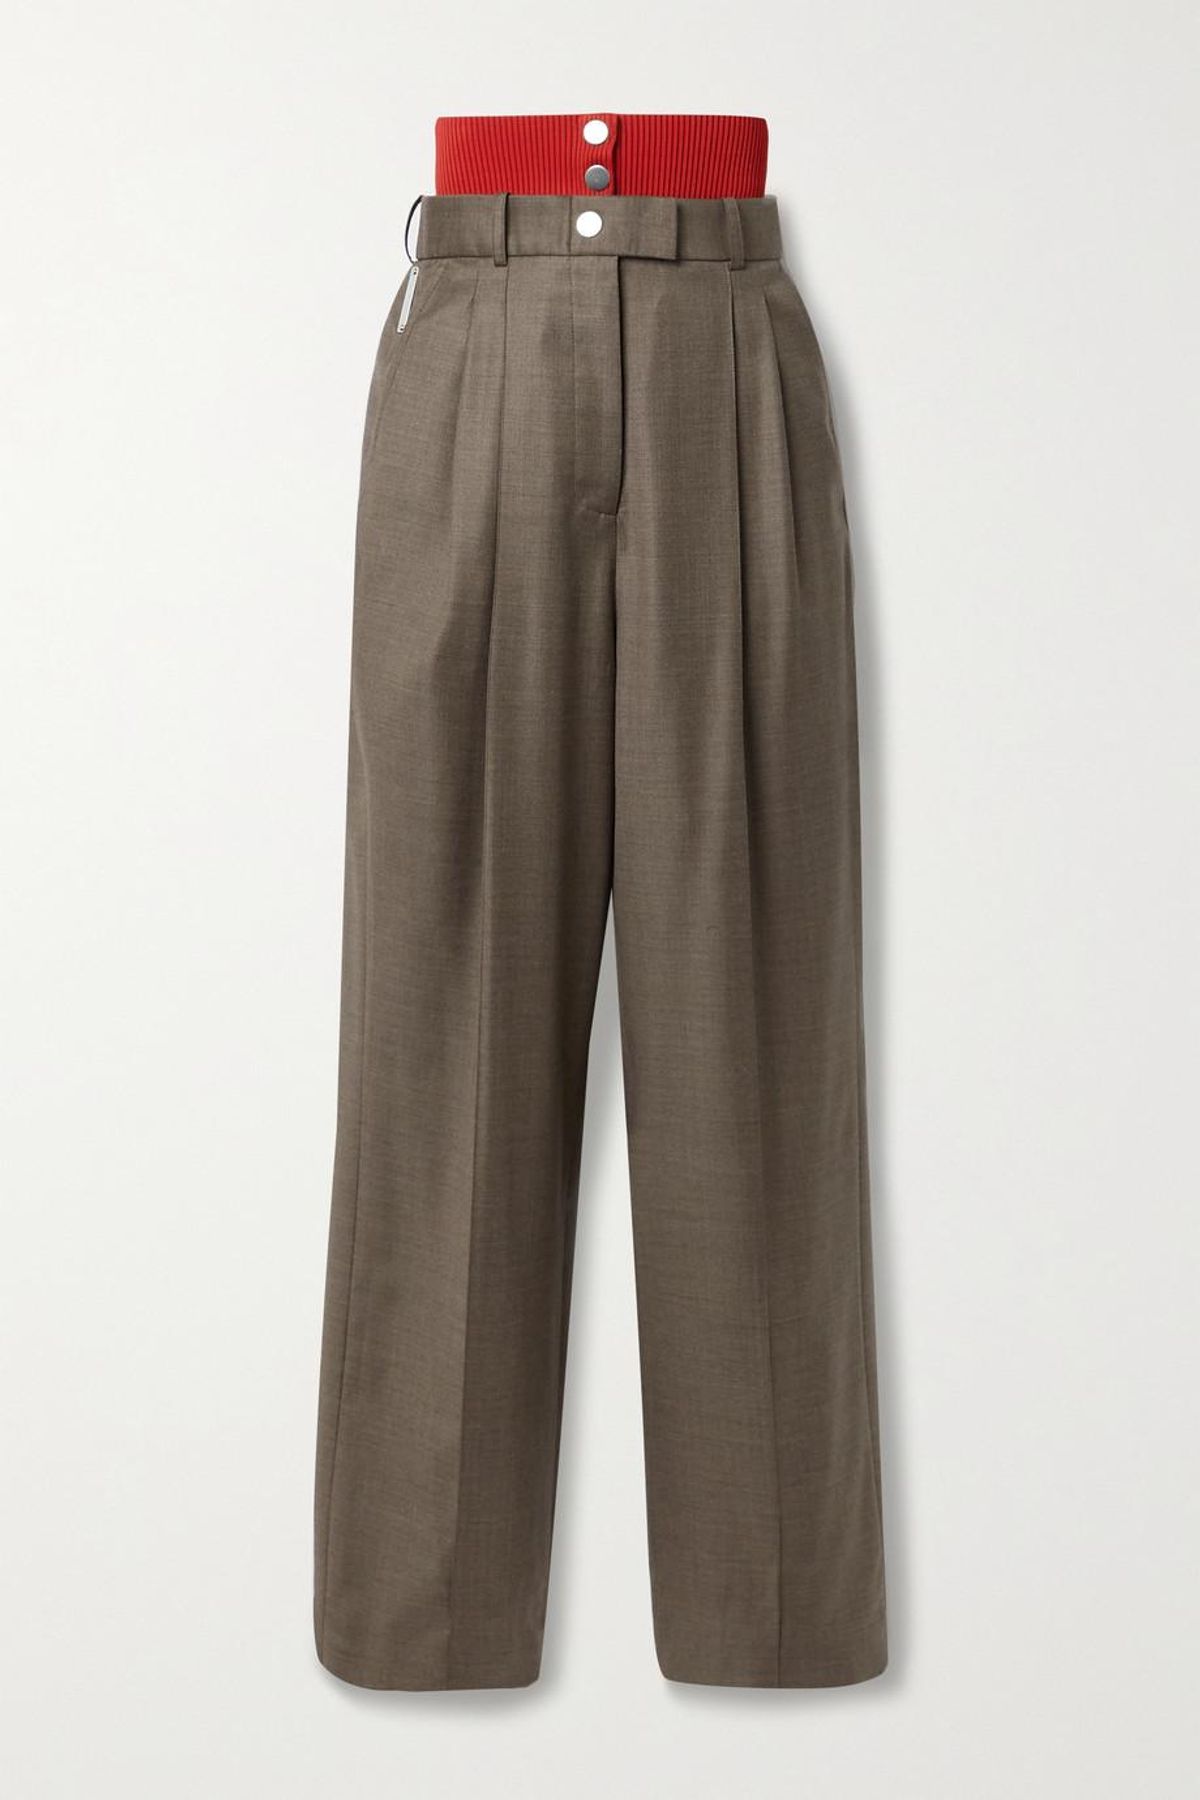 peter do ribbed knit trimmed wool straight leg pants